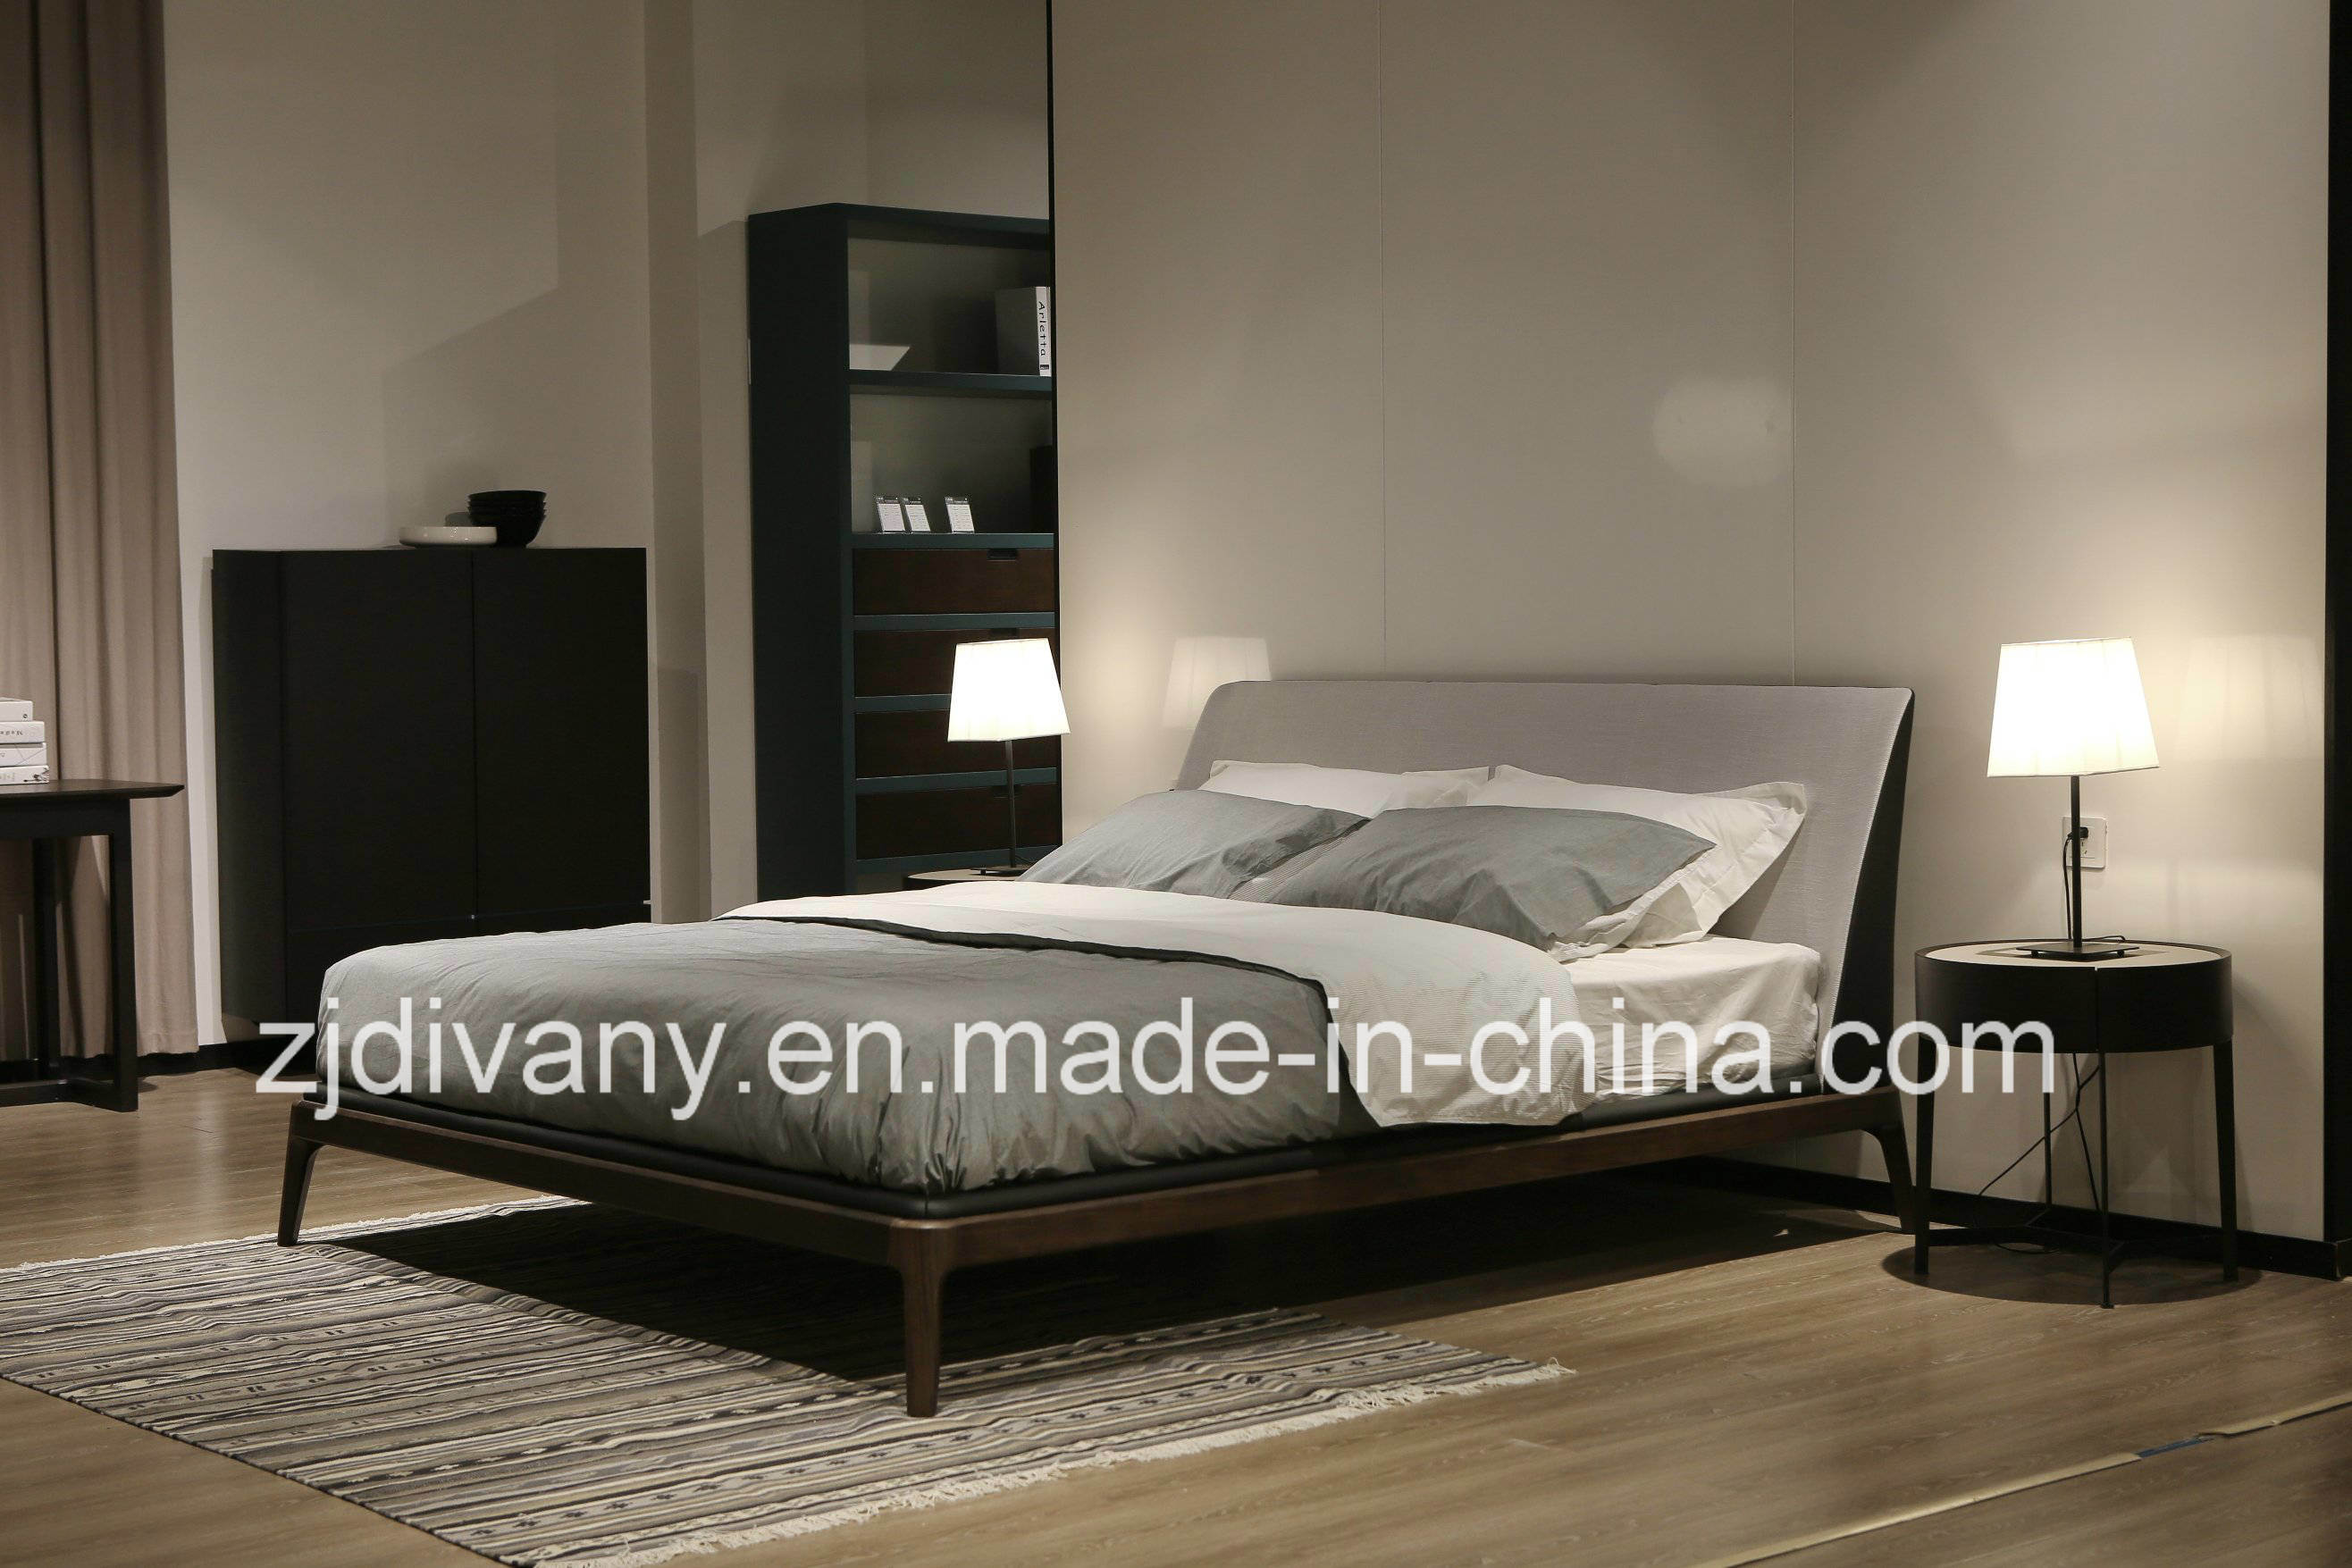 European Style Home Furniture Bedroom Bed Furniture (A-B44)